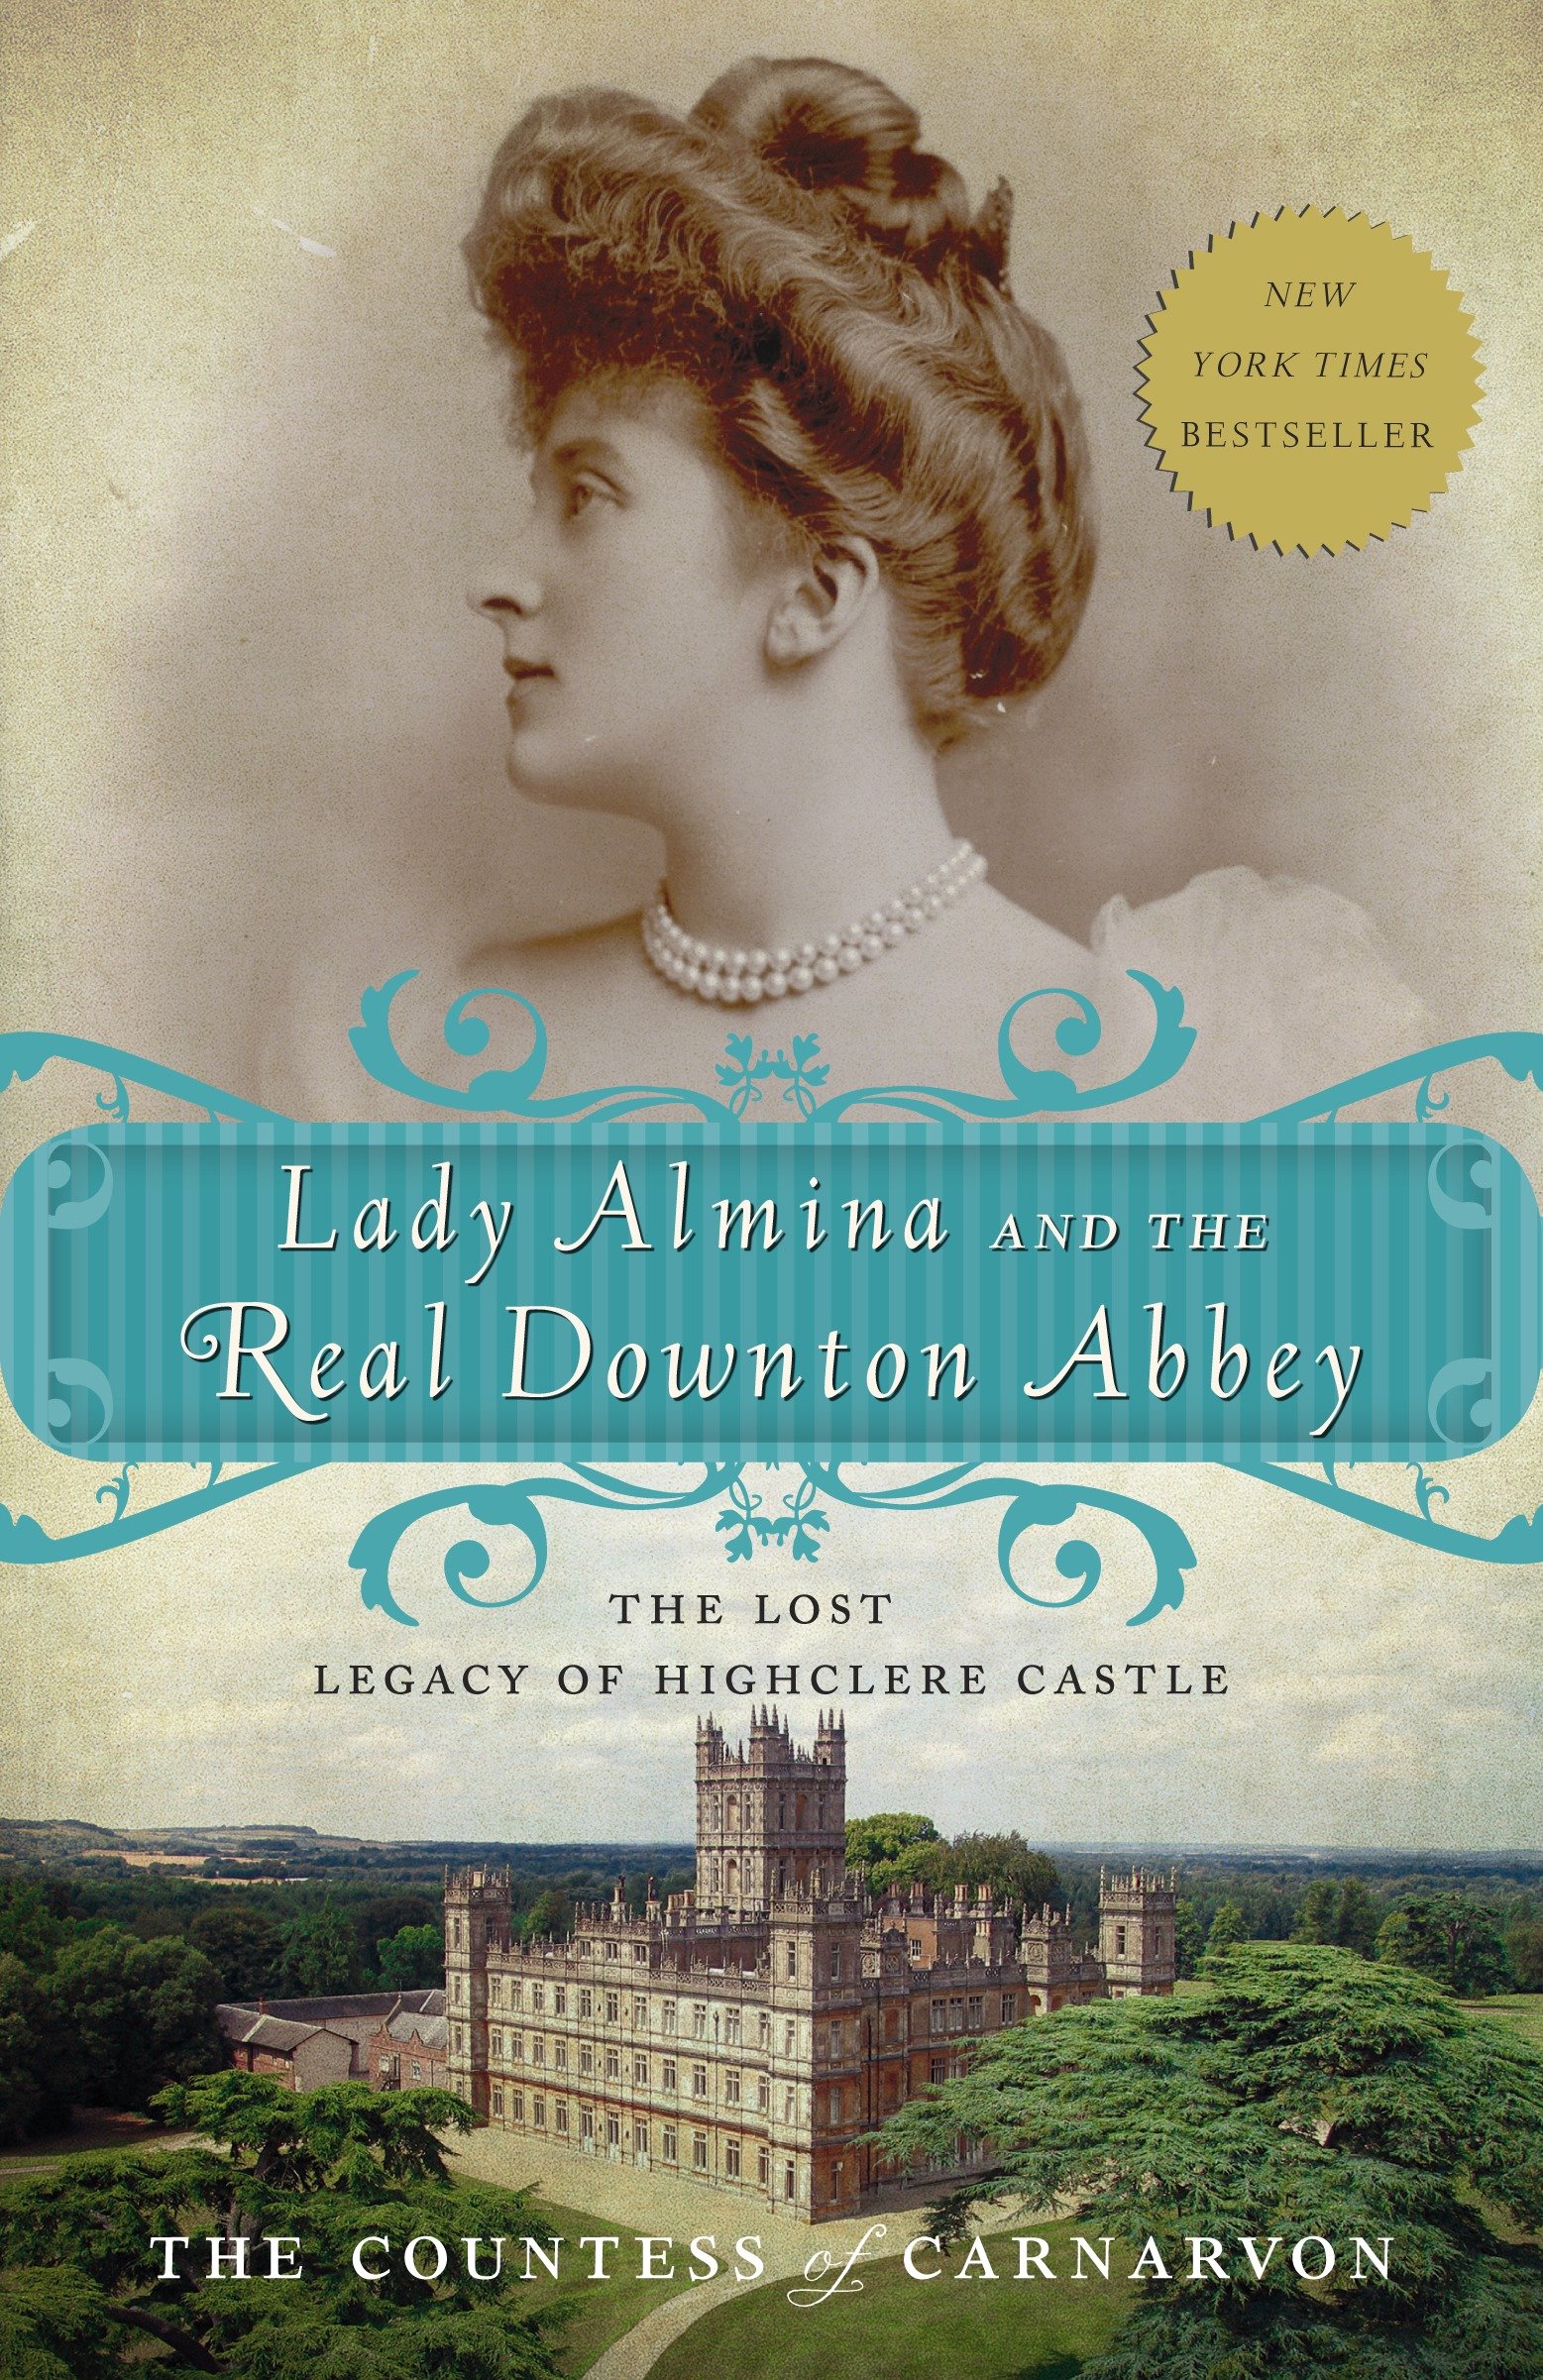 Lady Almina and the real Downton Abbey the lost legacy of Highclere Castle cover image